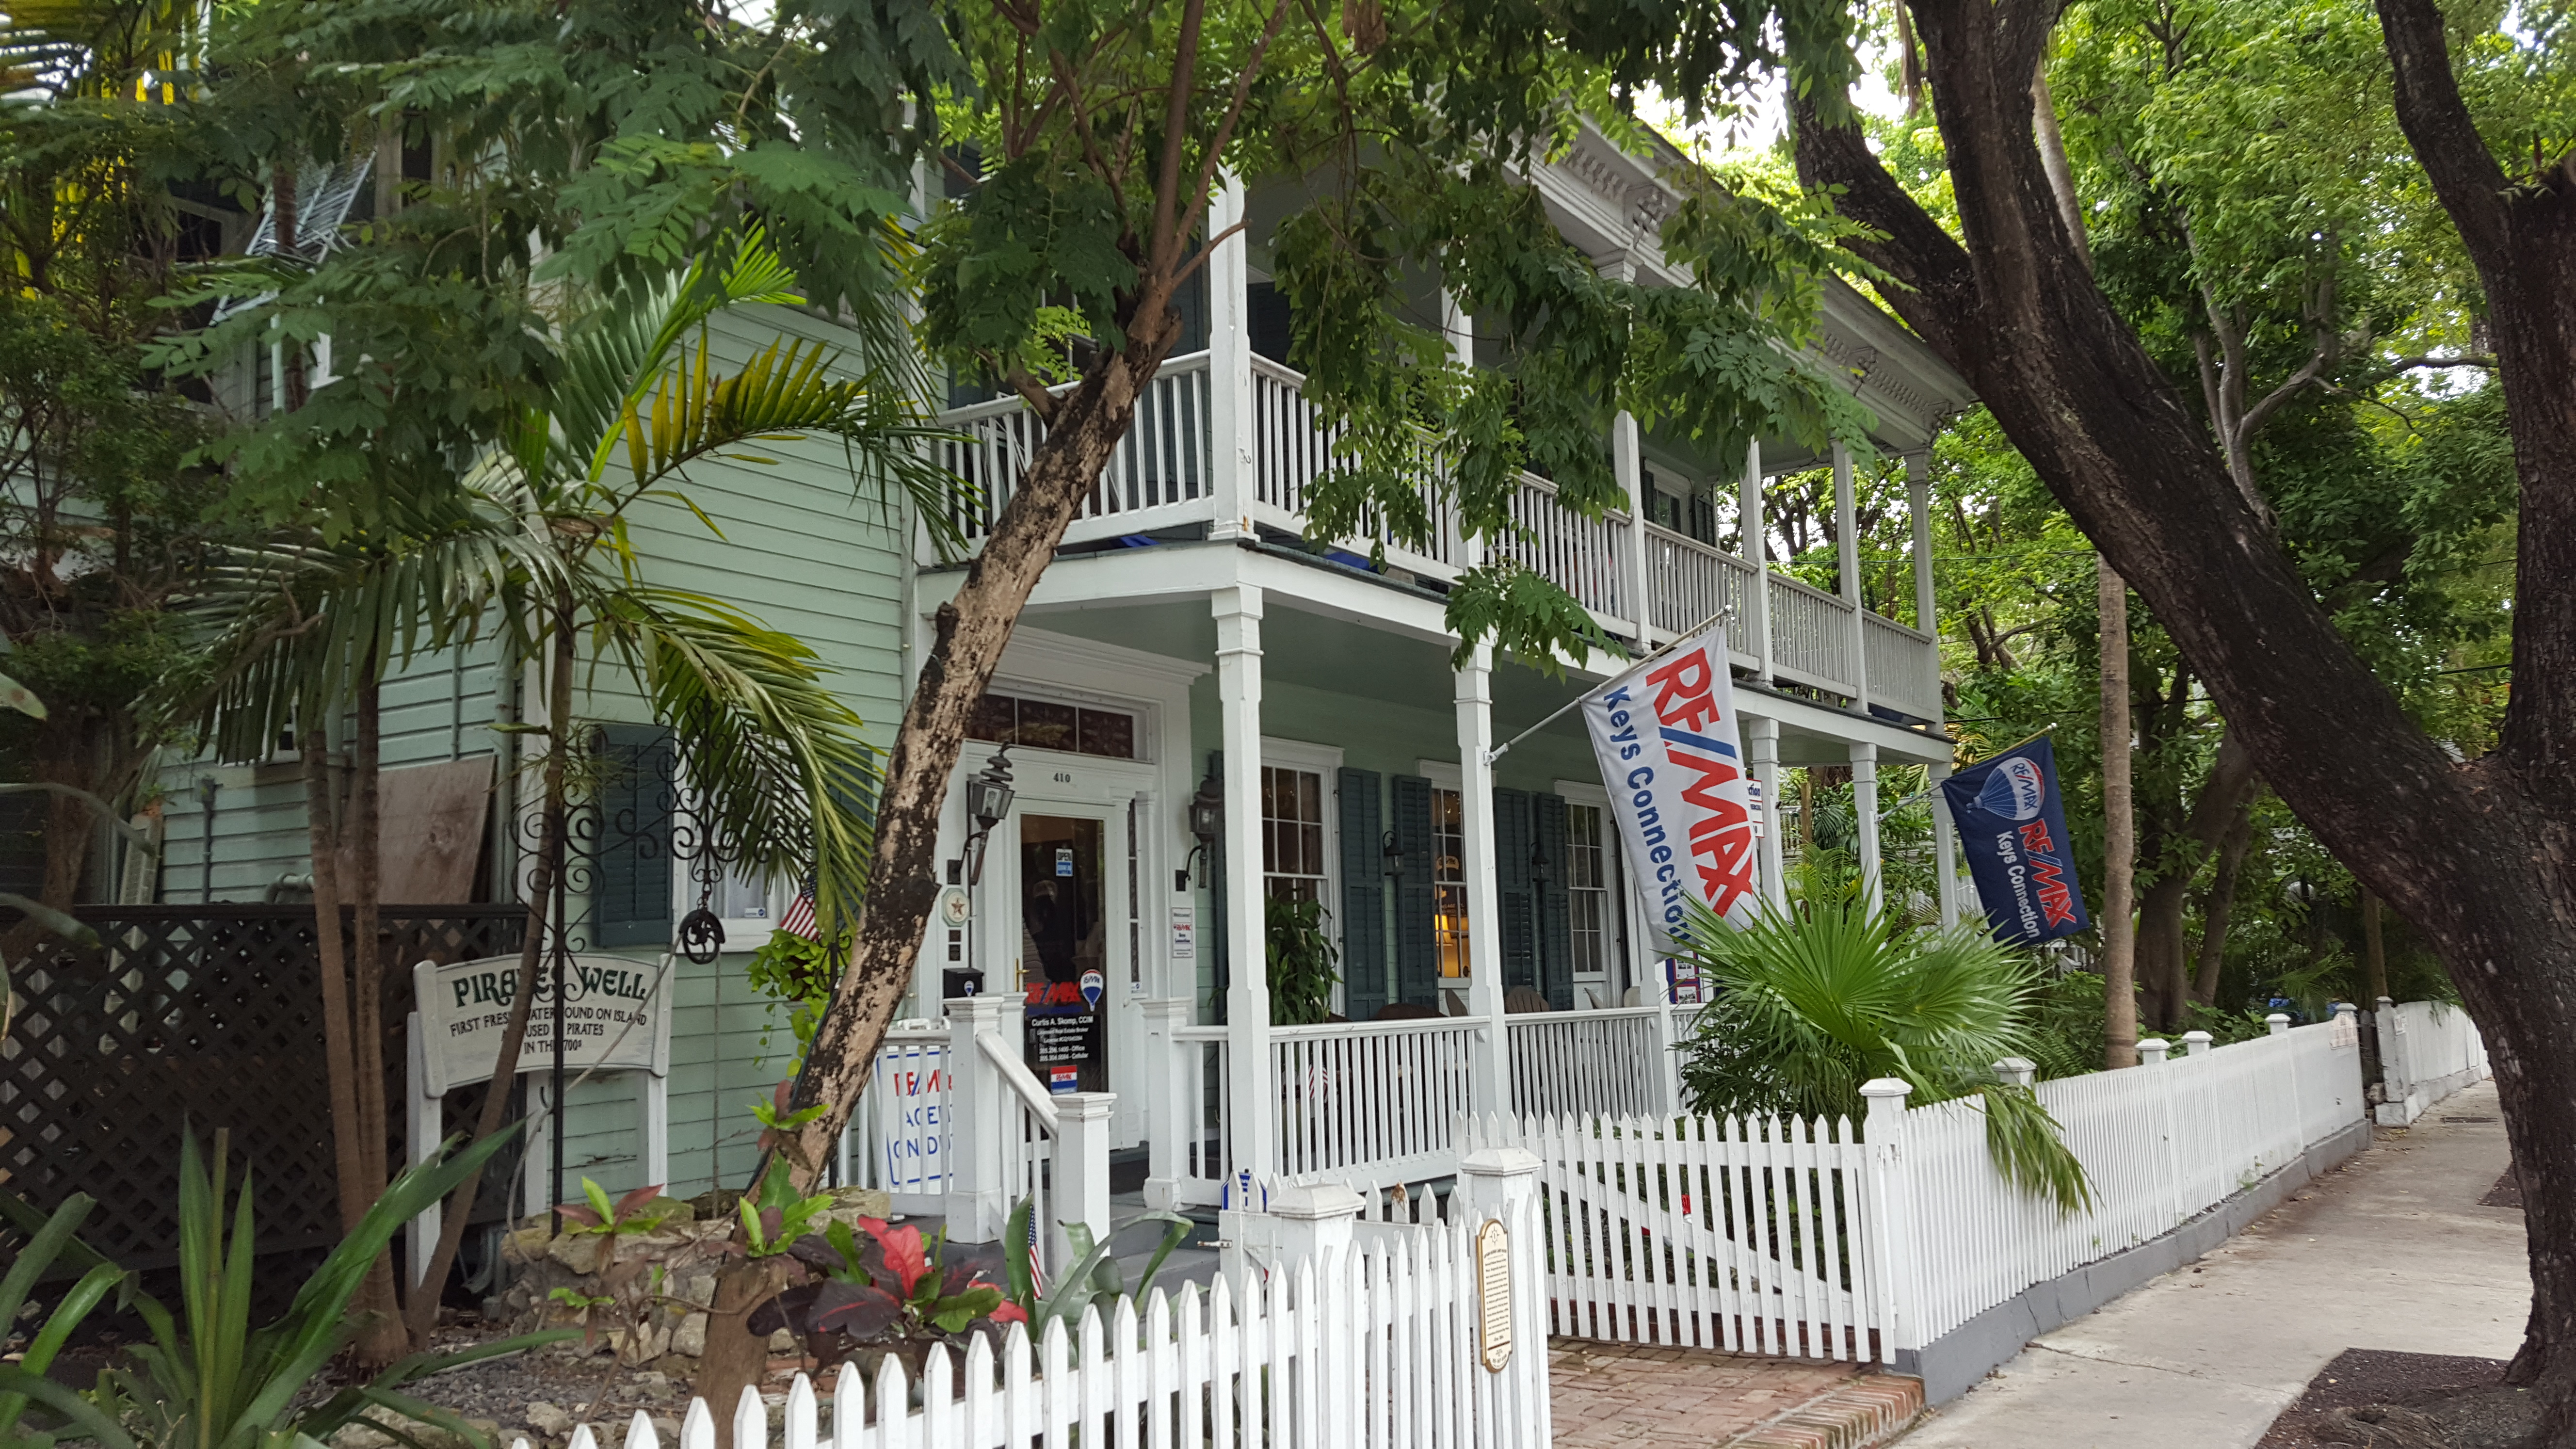 RE/MAX Key West FL Commercial Office